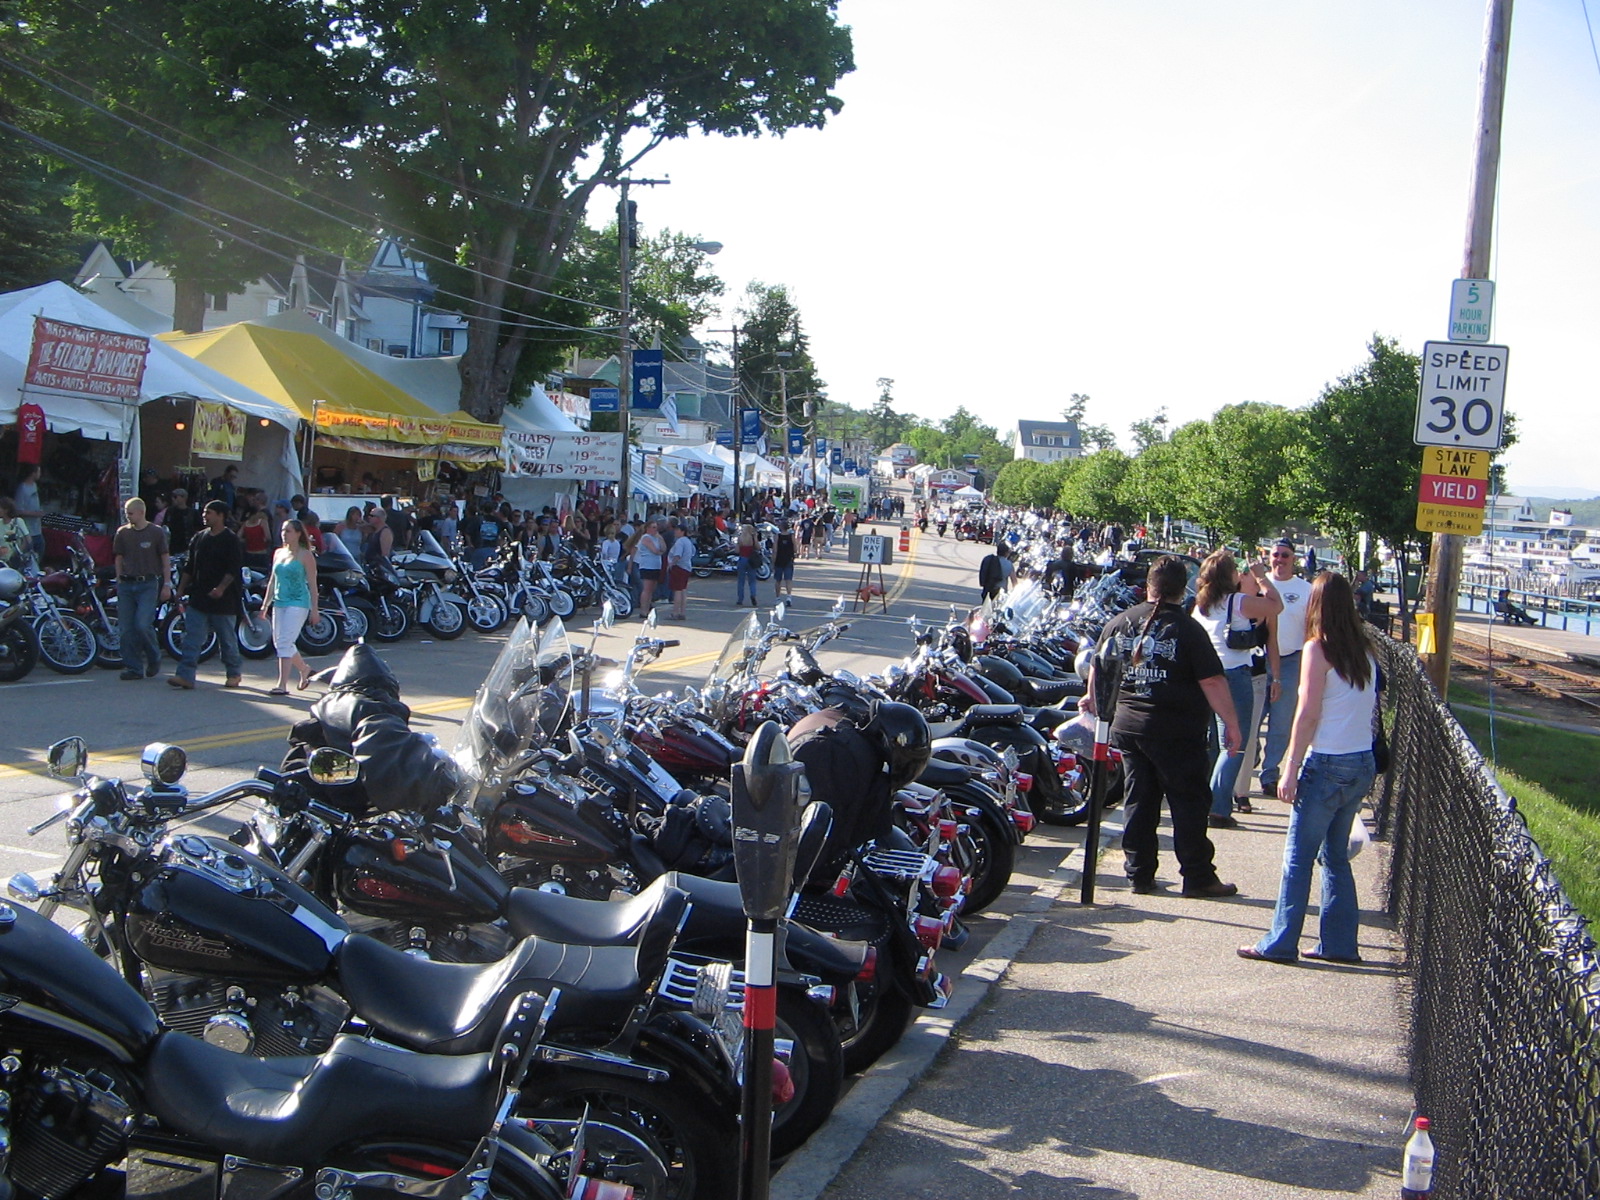 laconia motorcycle rally, gypsy tours